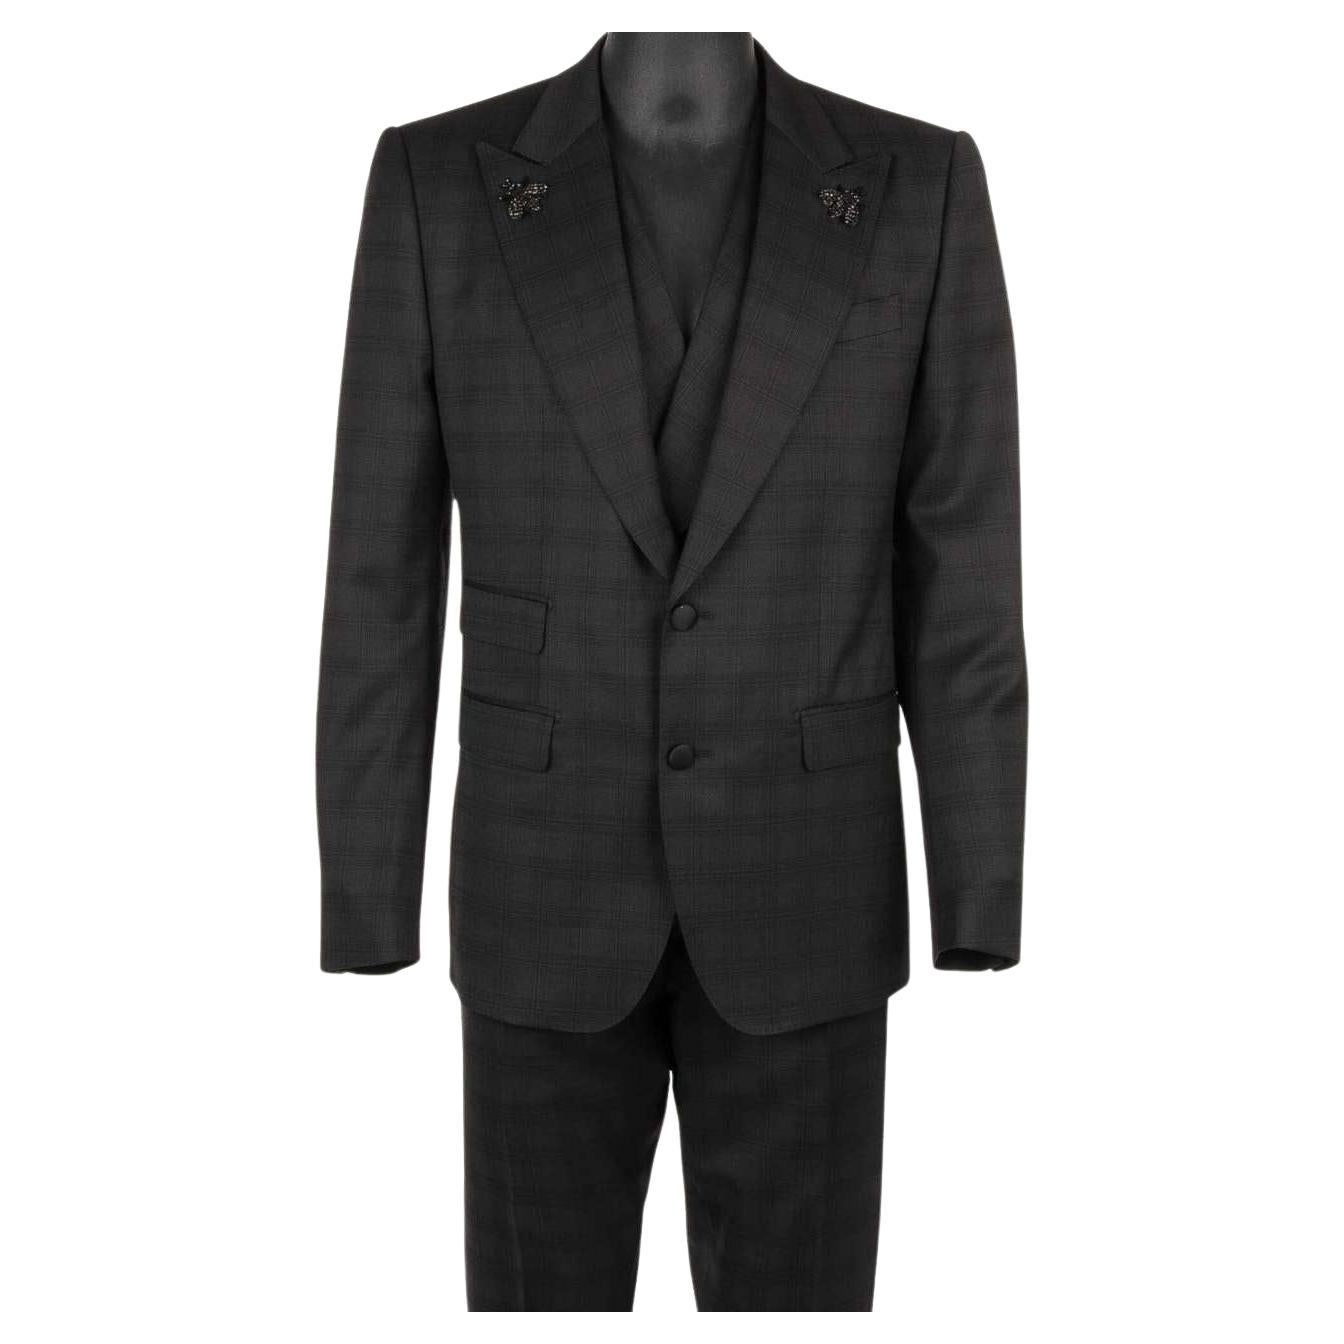 D&G 3 Piece Checked Suit Jacket Waistcoat Bee Brooch SICILIA Black 52 For Sale